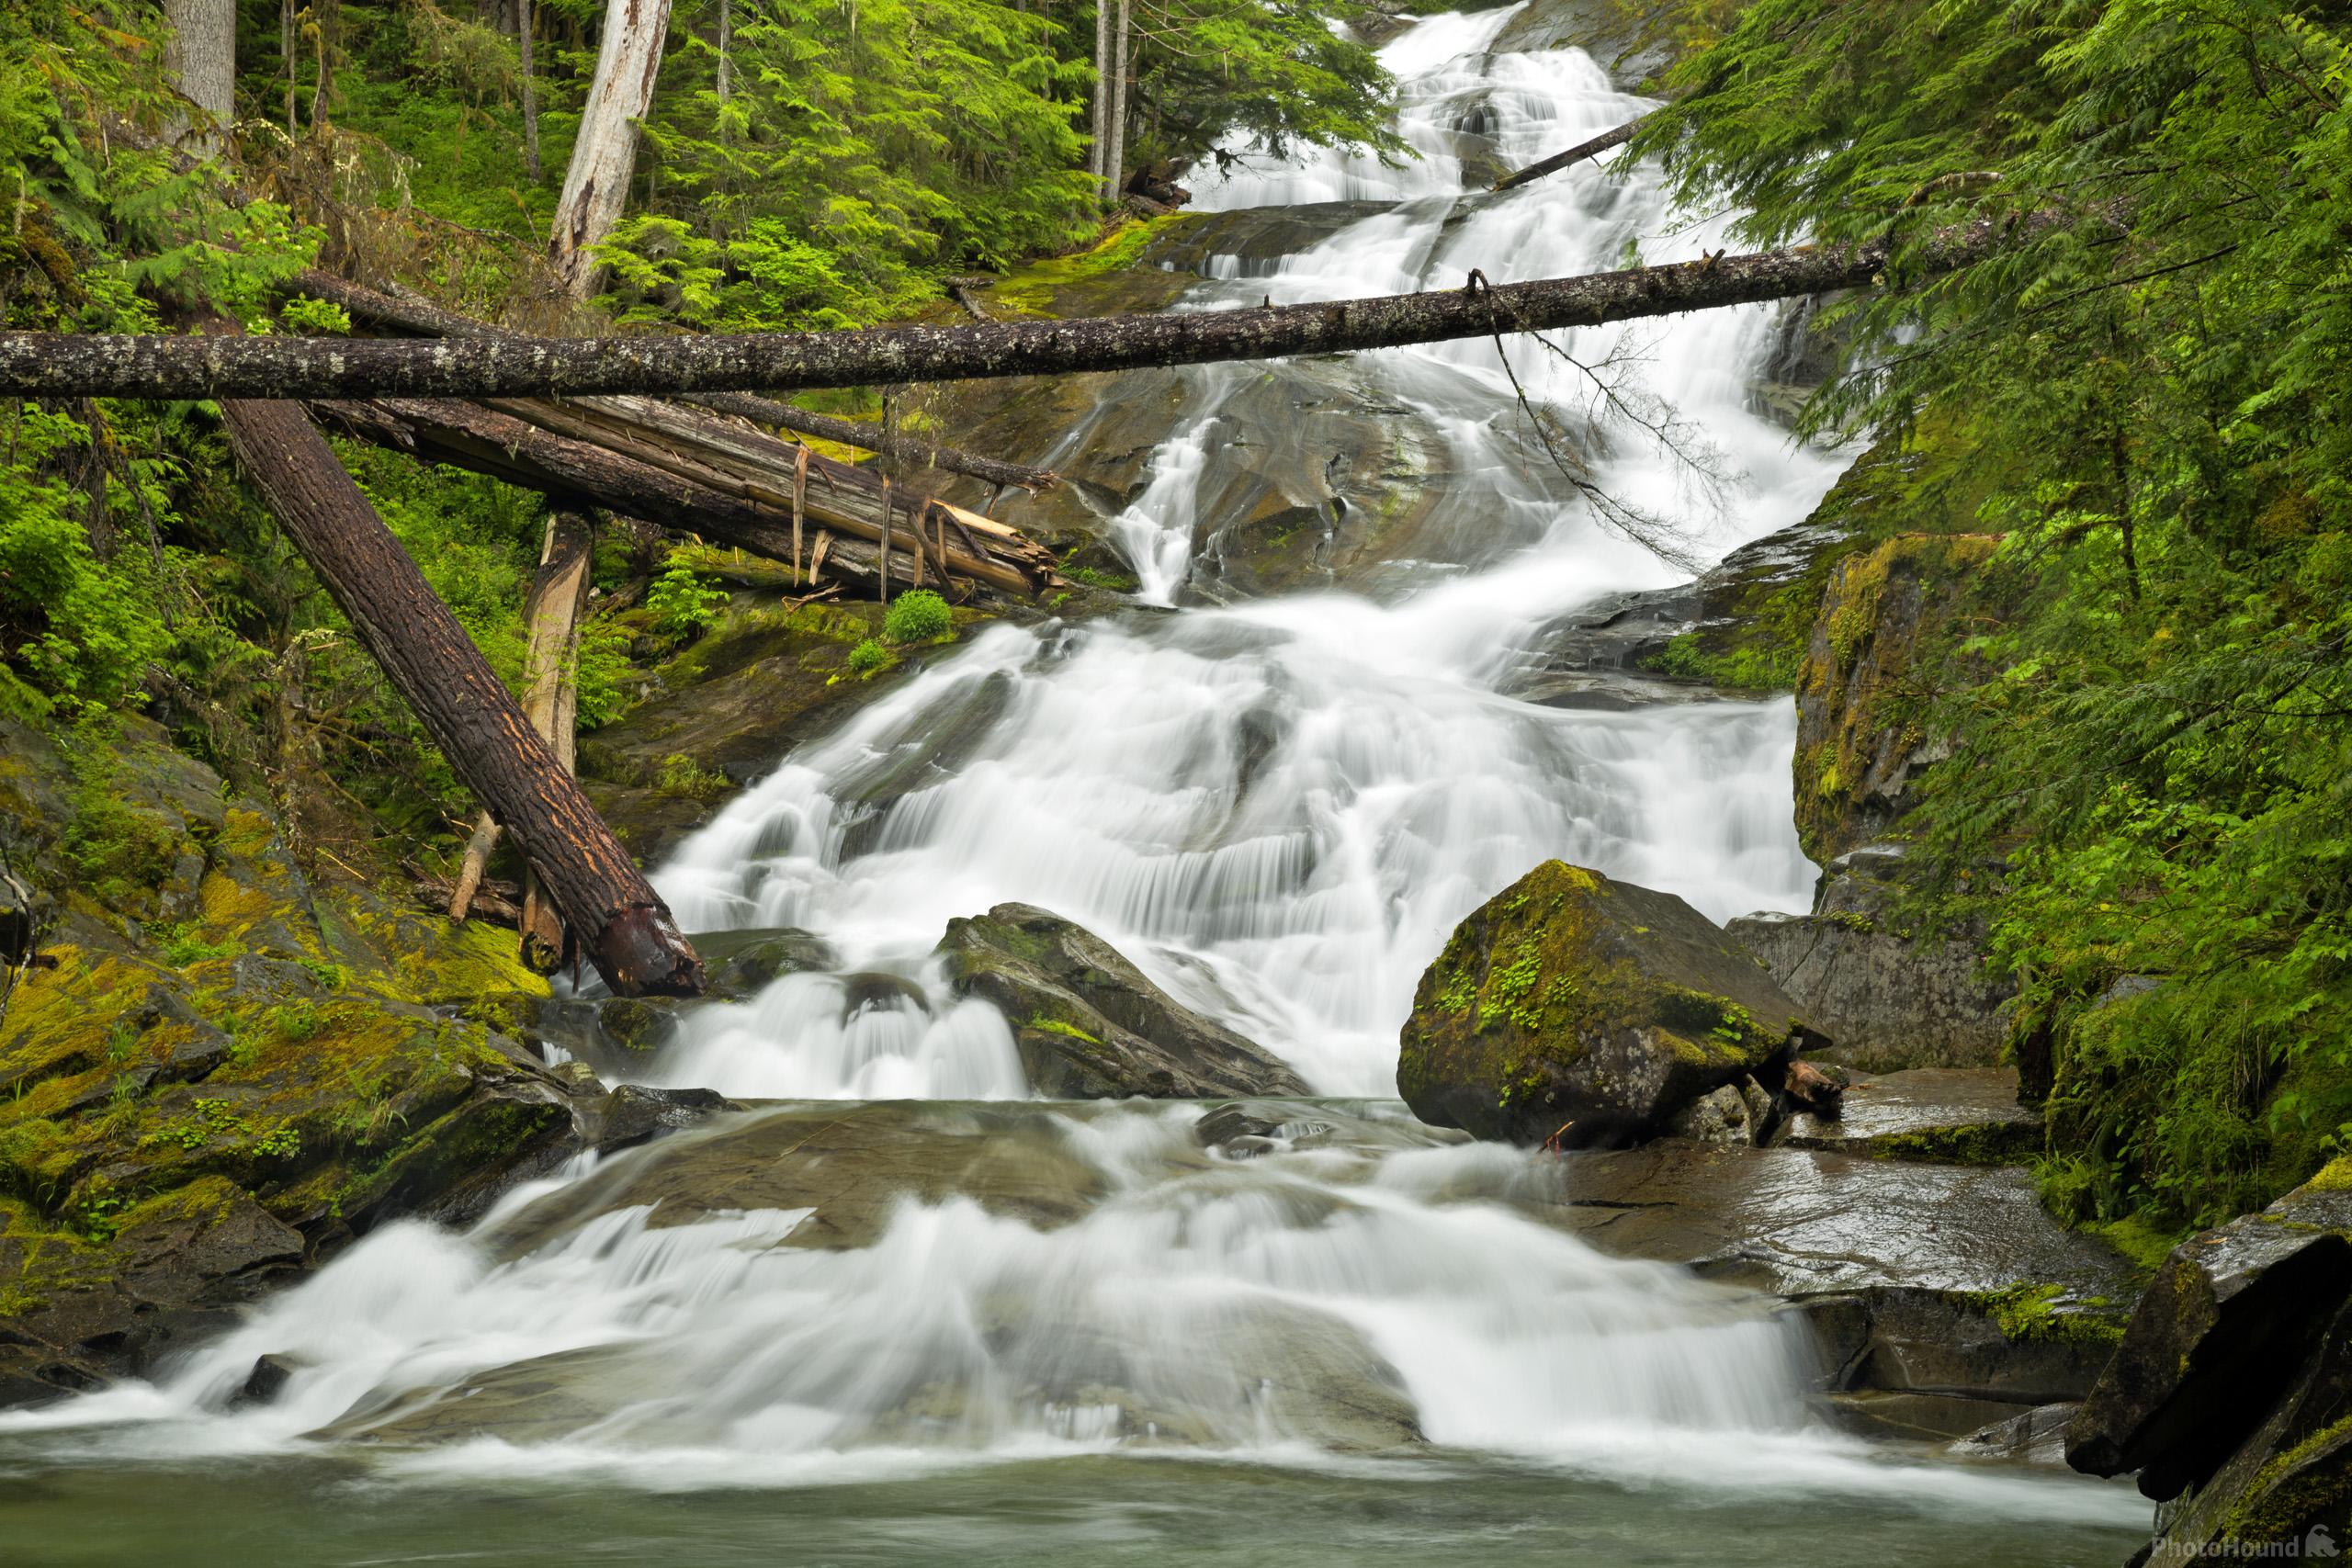 Image of Chenais Falls, Mount Rainier National Park by T. Kirkendall and V. Spring